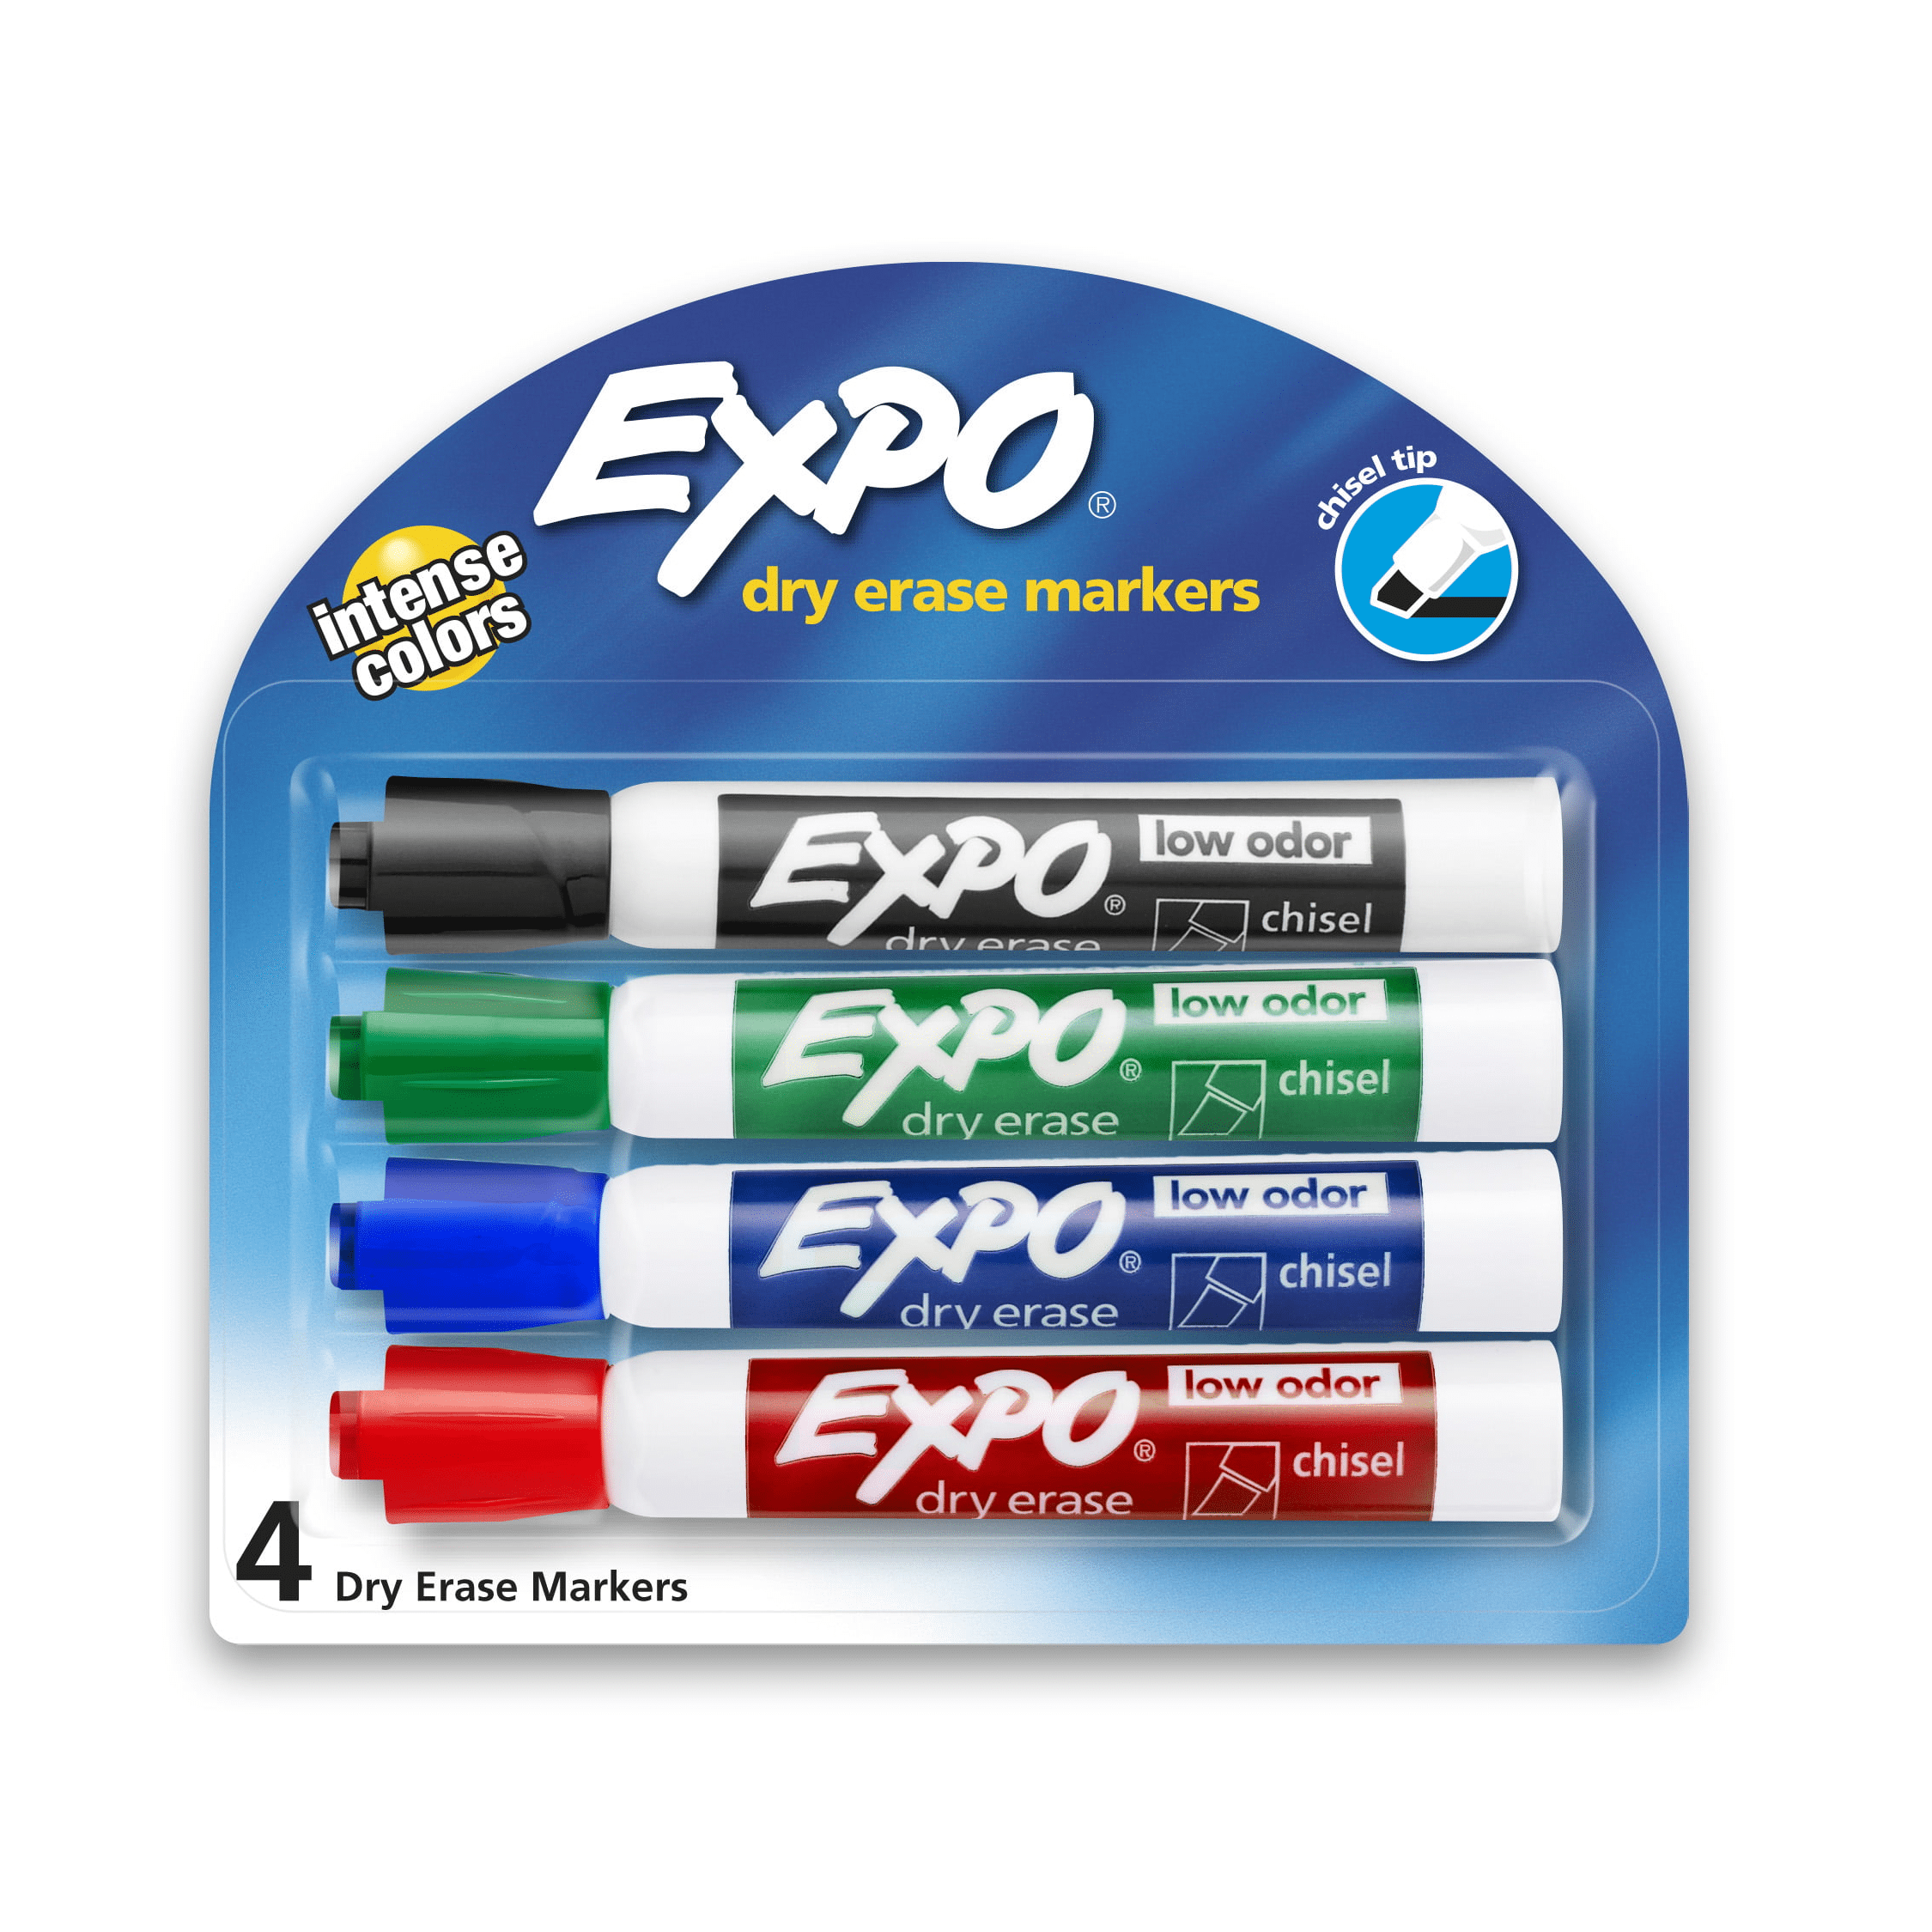 Student Dry Erase Markers. Great Prices. Bold Colors. Great